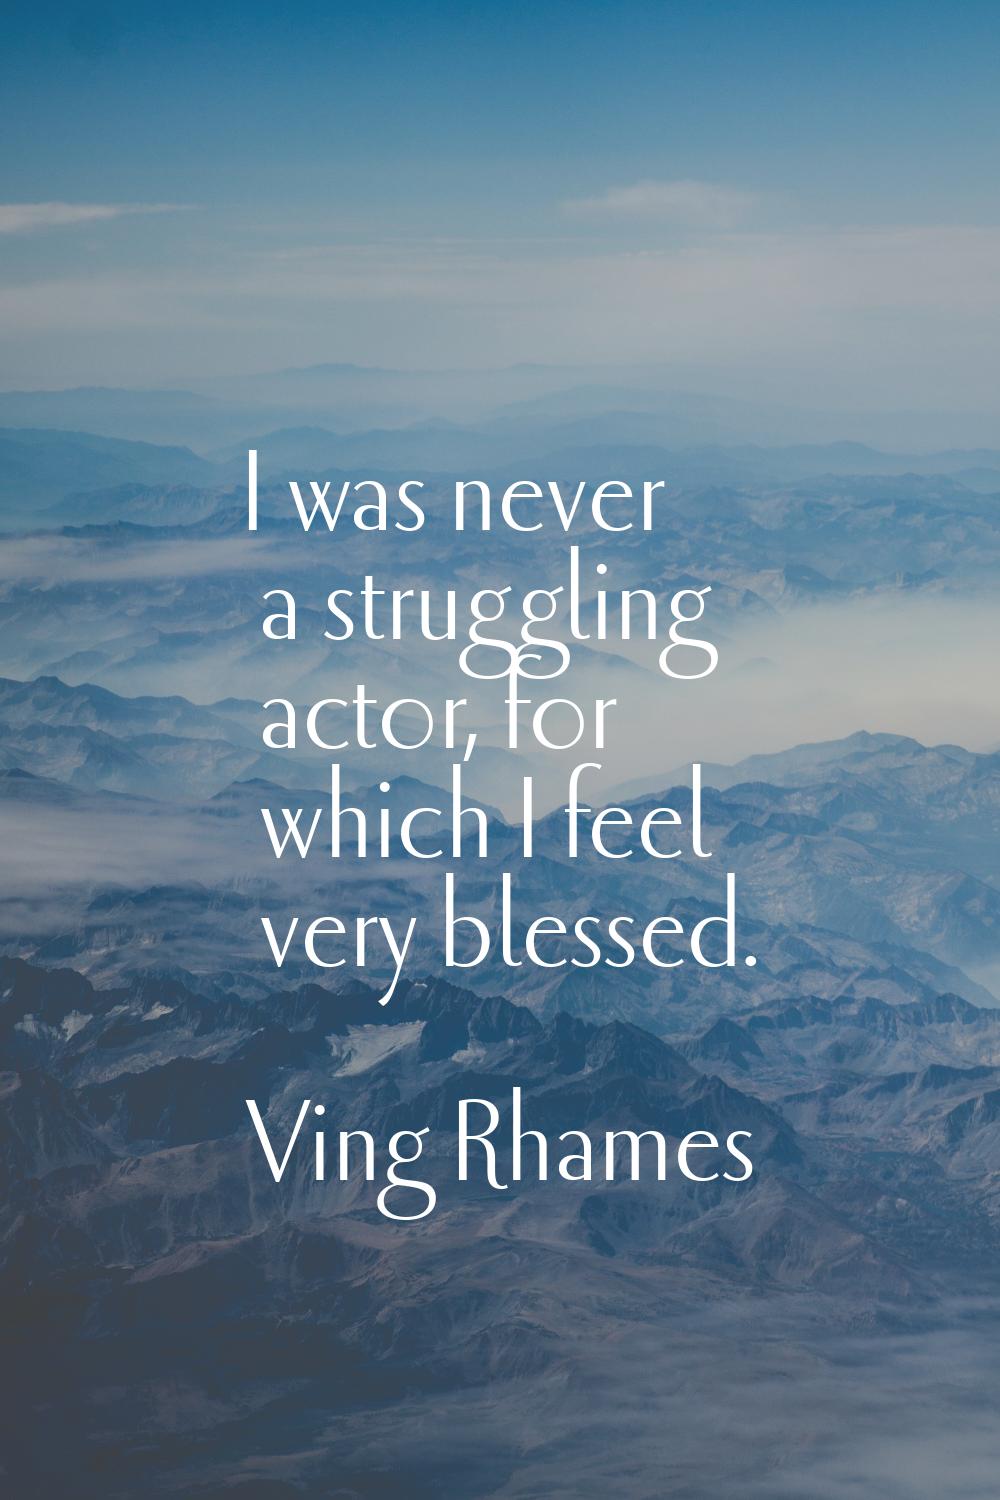 I was never a struggling actor, for which I feel very blessed.